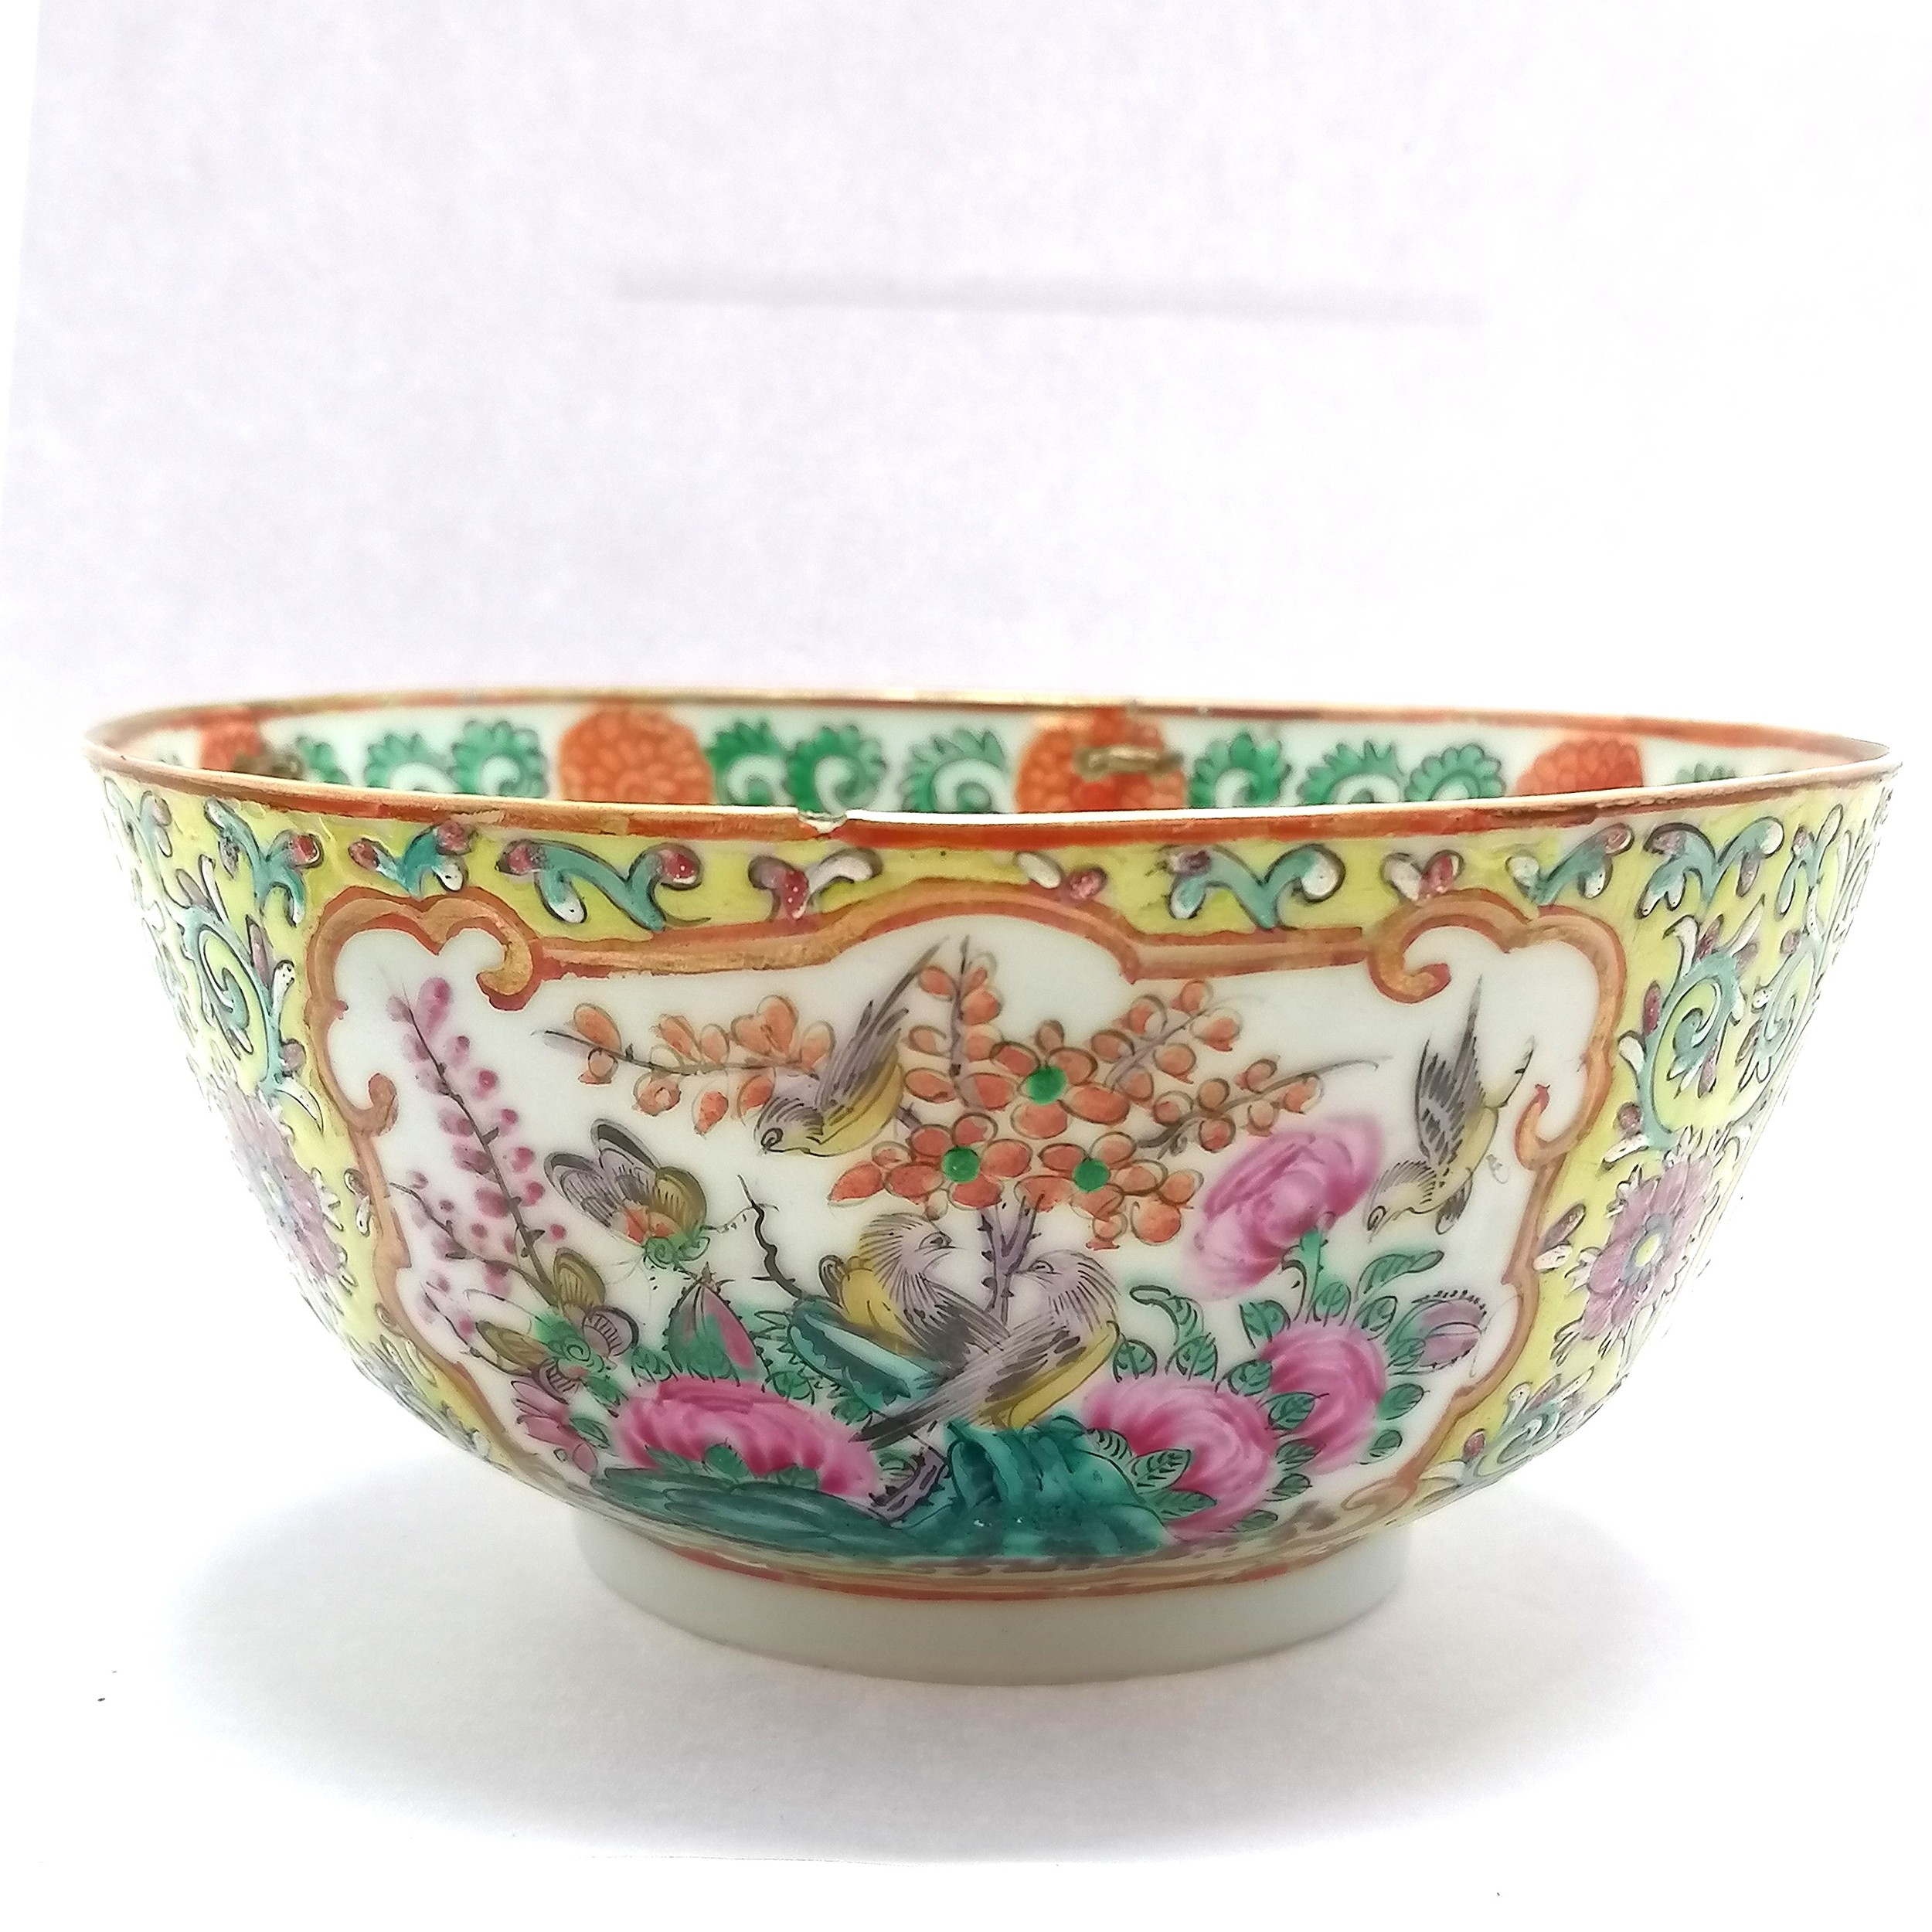 Antique Chinese famille rose bowl - yellow grounded with profuse floral & butterfly & bird (inc - Image 8 of 10